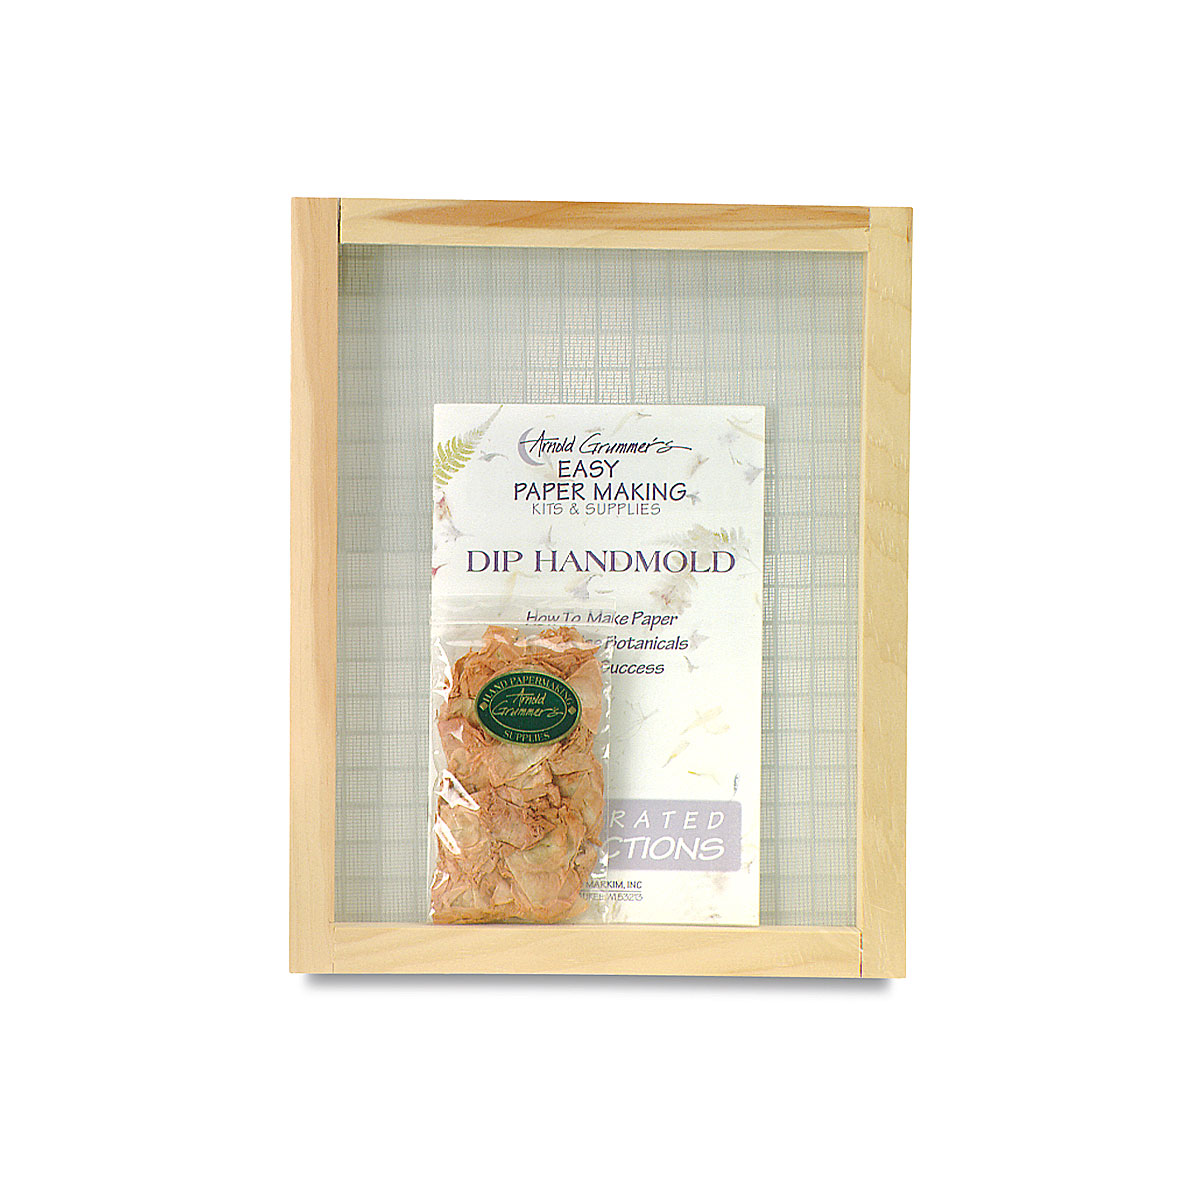 Arnold Grummer Large Economy Dip Handmold, 8-1/2 x 11 Inches